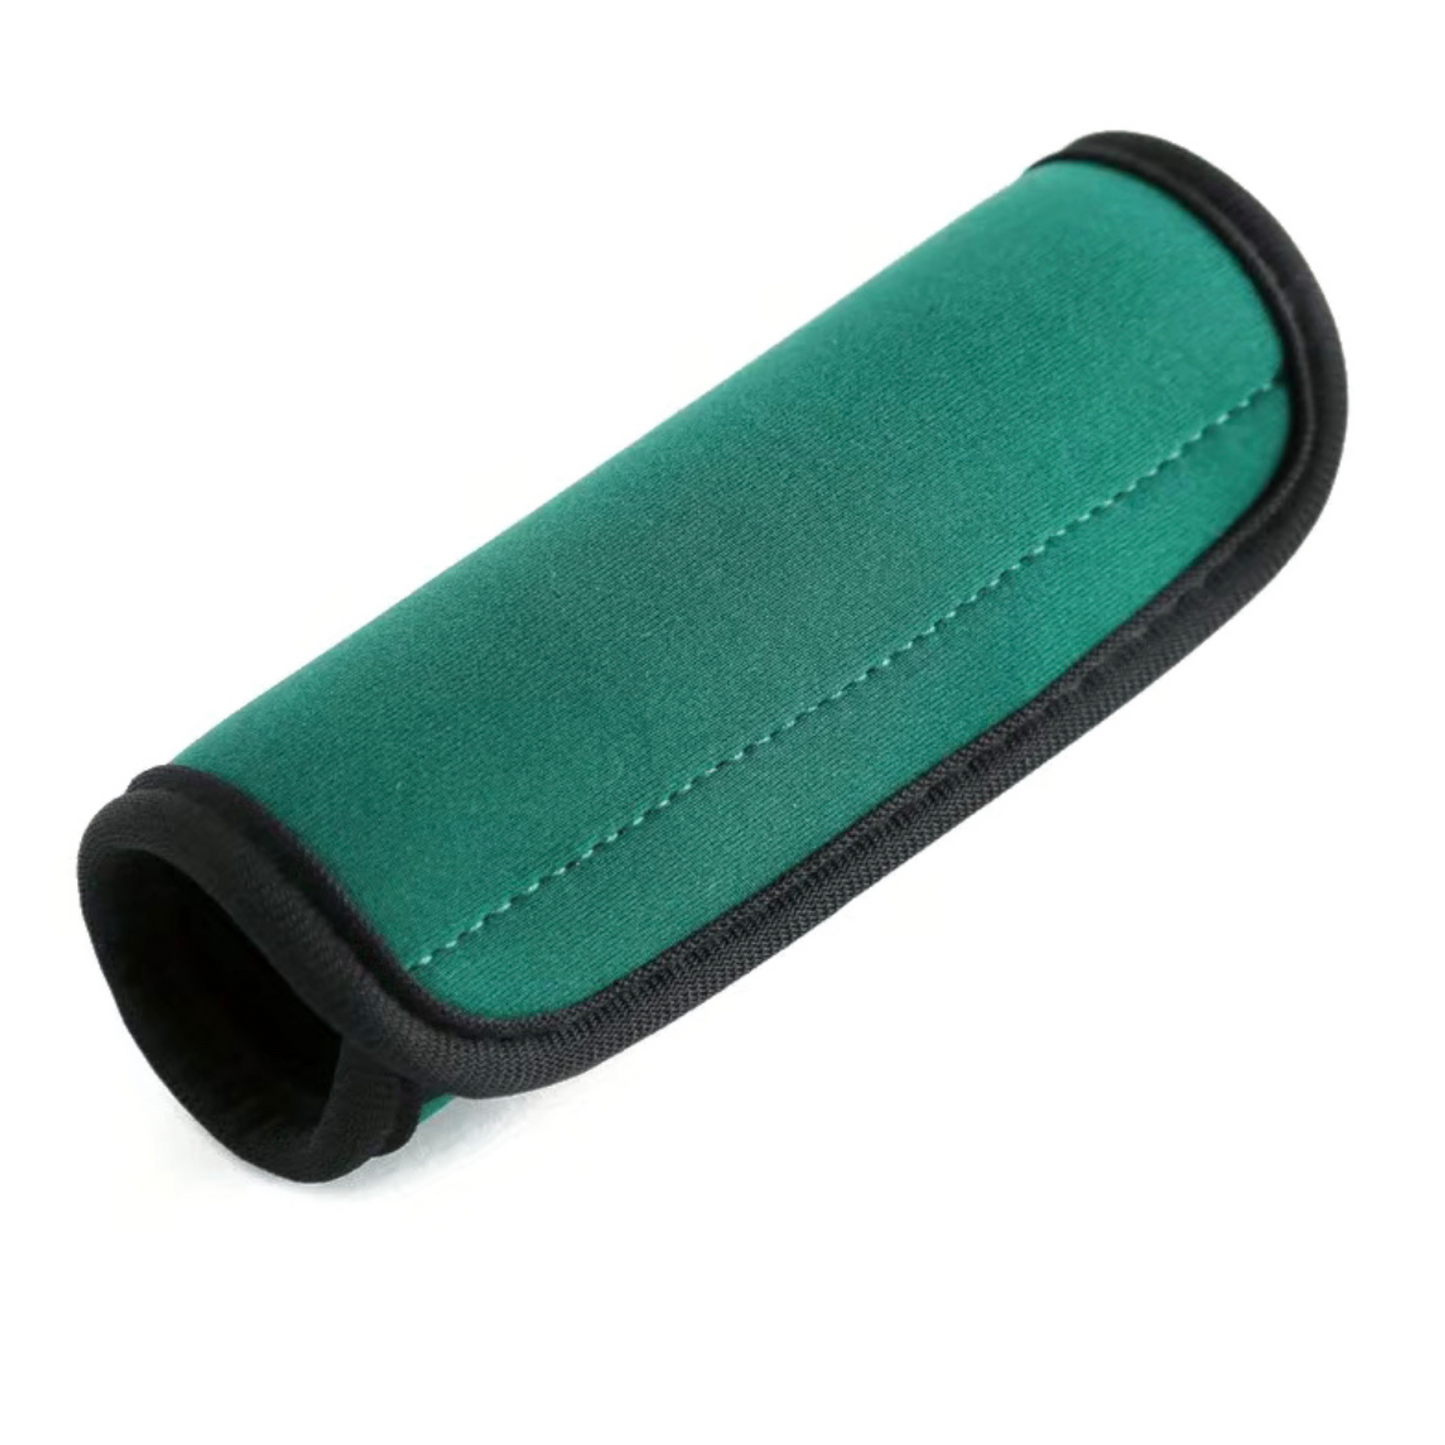 Handle Wrap- Assorted Colors